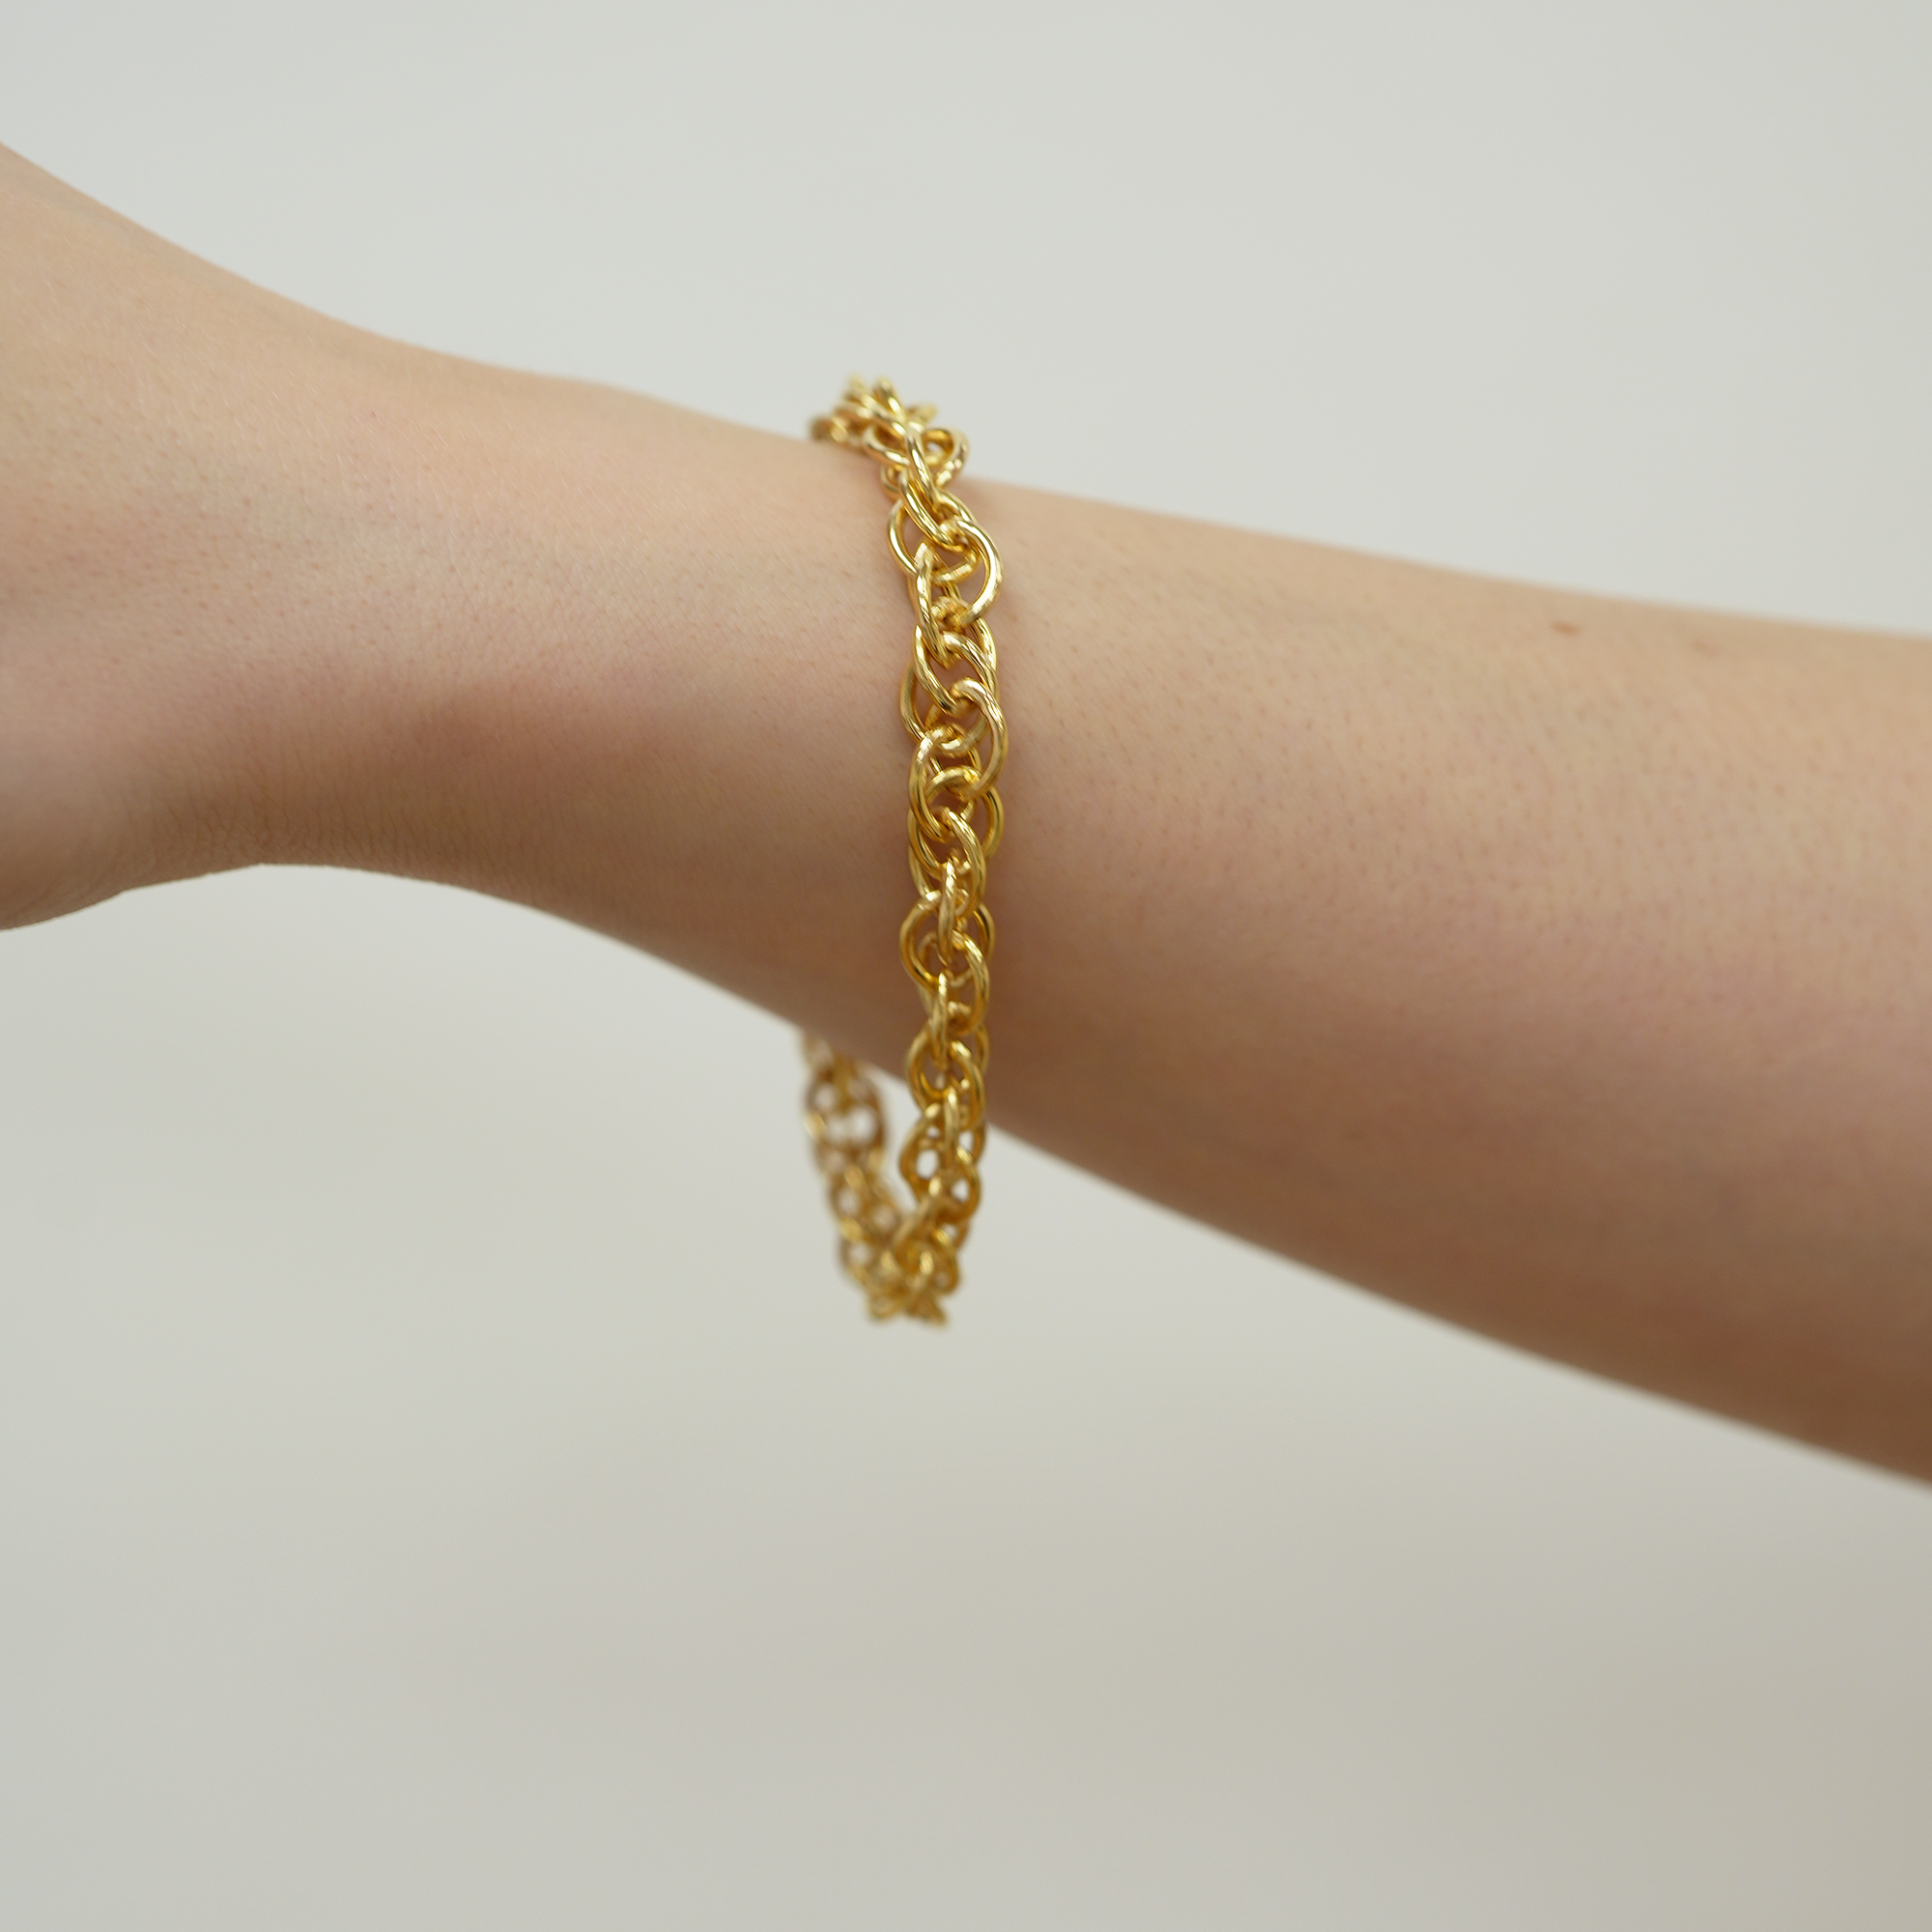 THE HOLLOW ROPE BRACELET